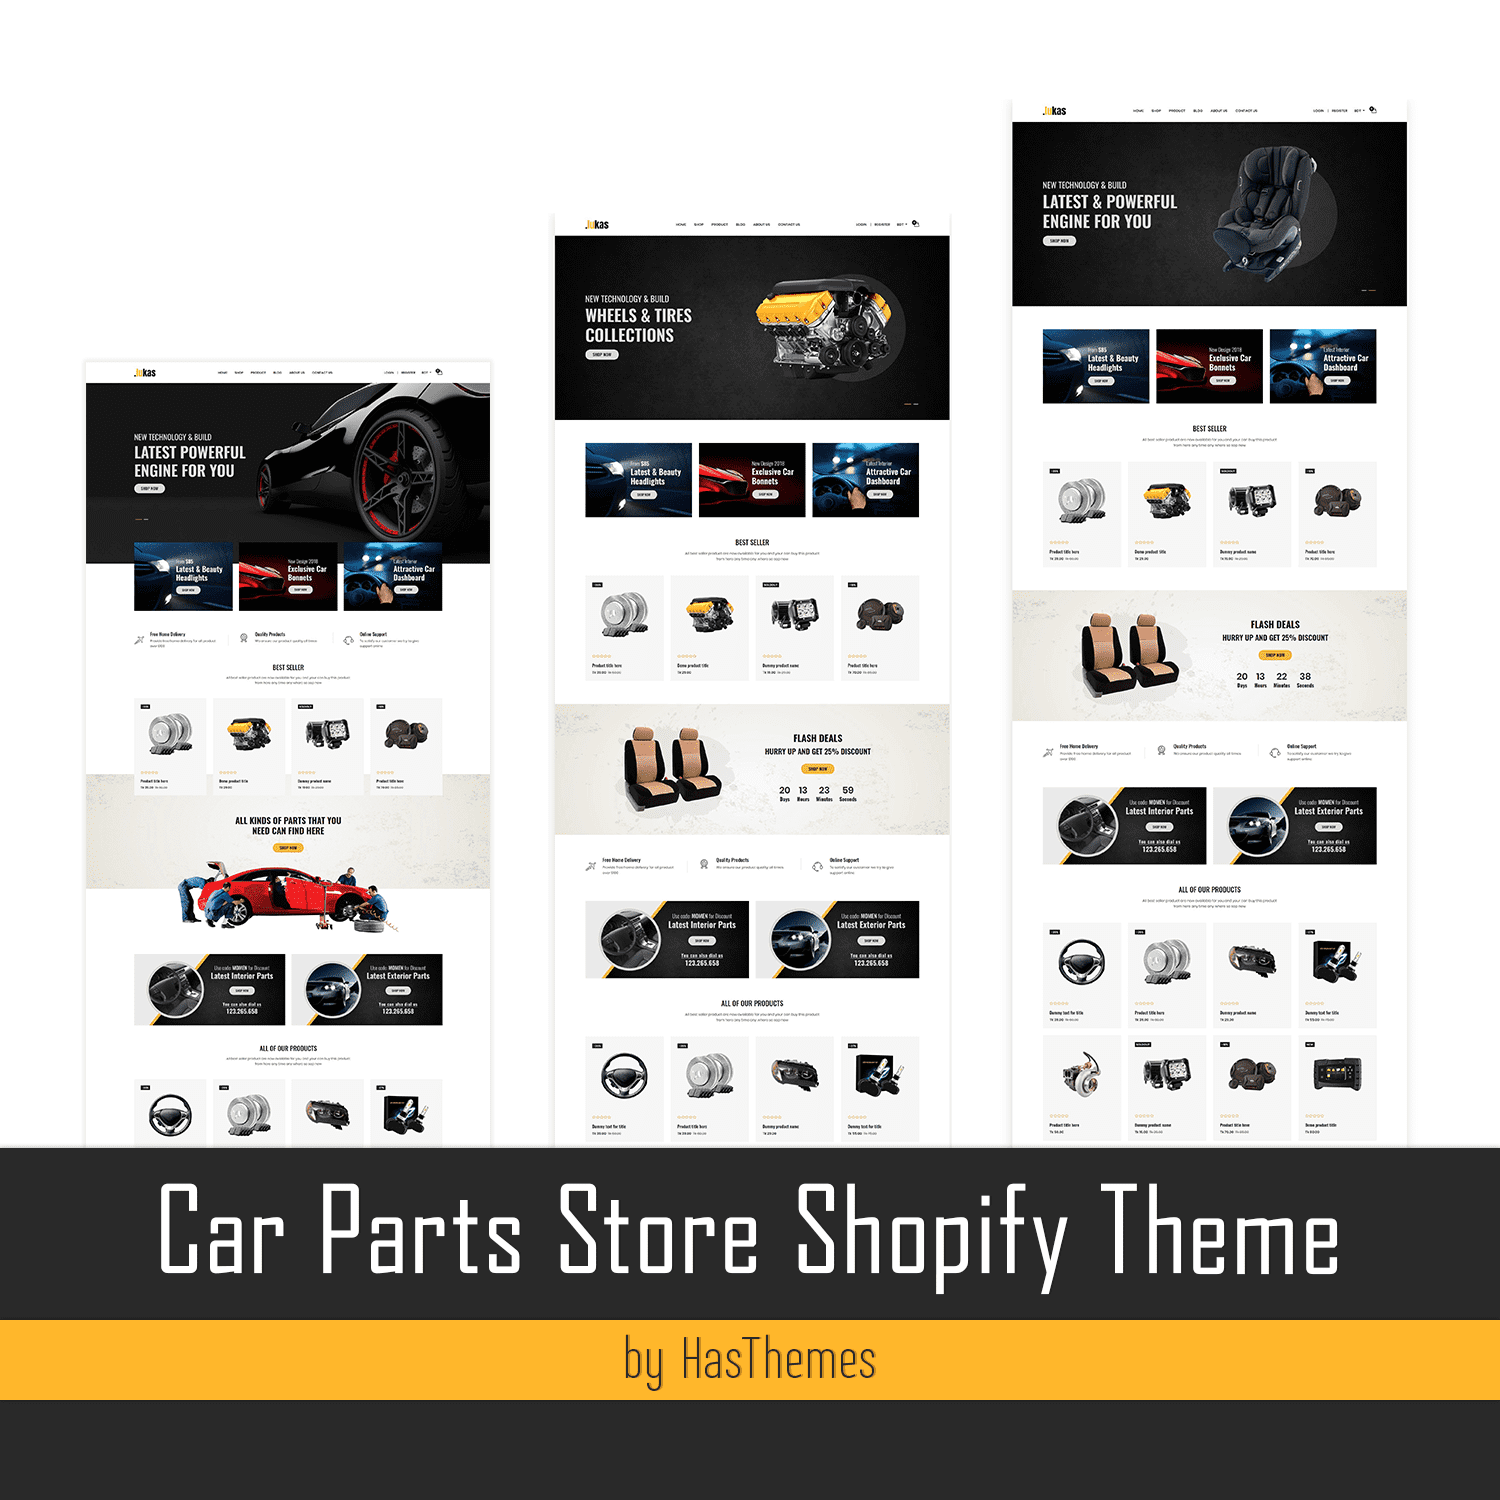 Car Parts Store Shopify Theme created by HasThemes.